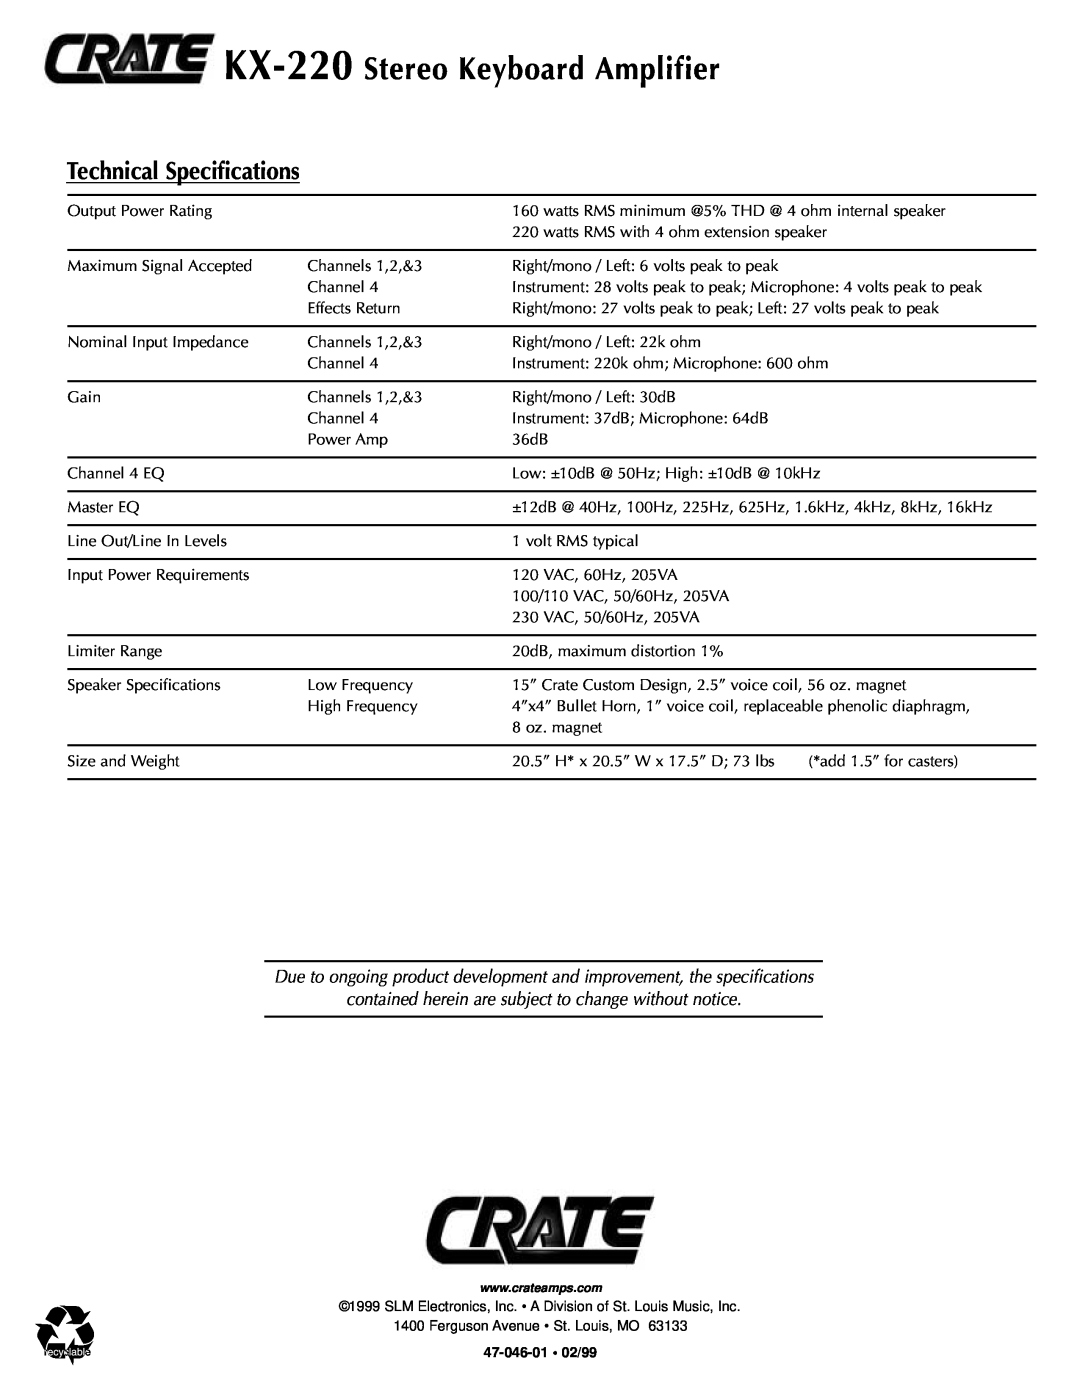 Crate Amplifiers manual Technical Specifications, KX-220 Stereo Keyboard Amplifier 